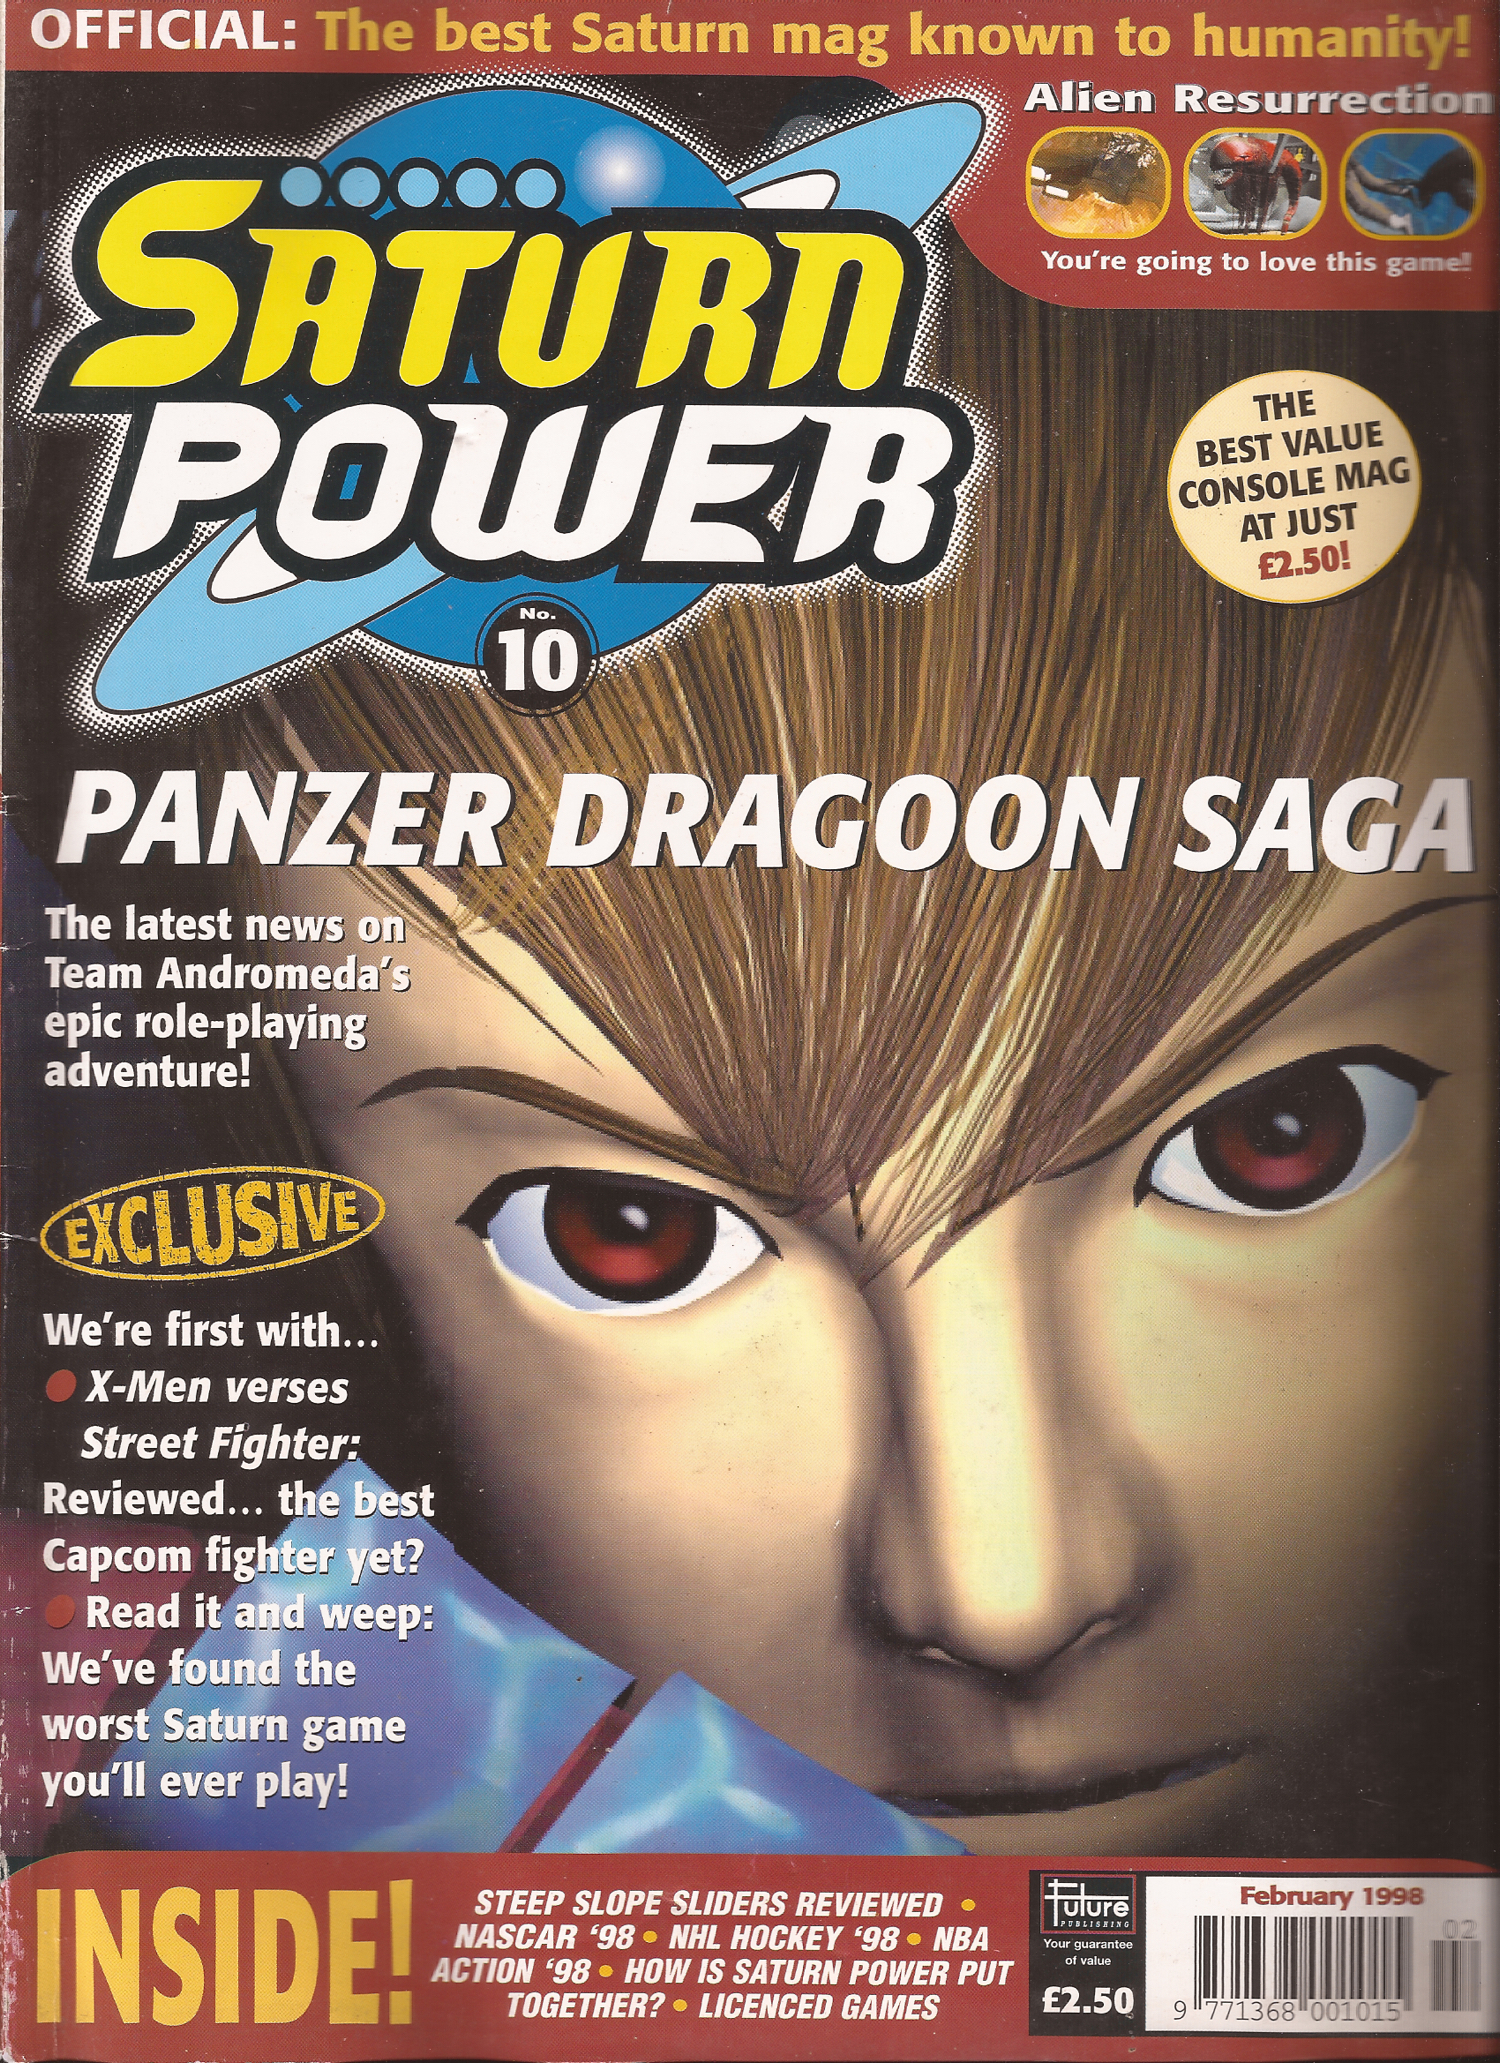 New Saturn Power Magazine Scans and Fan Art